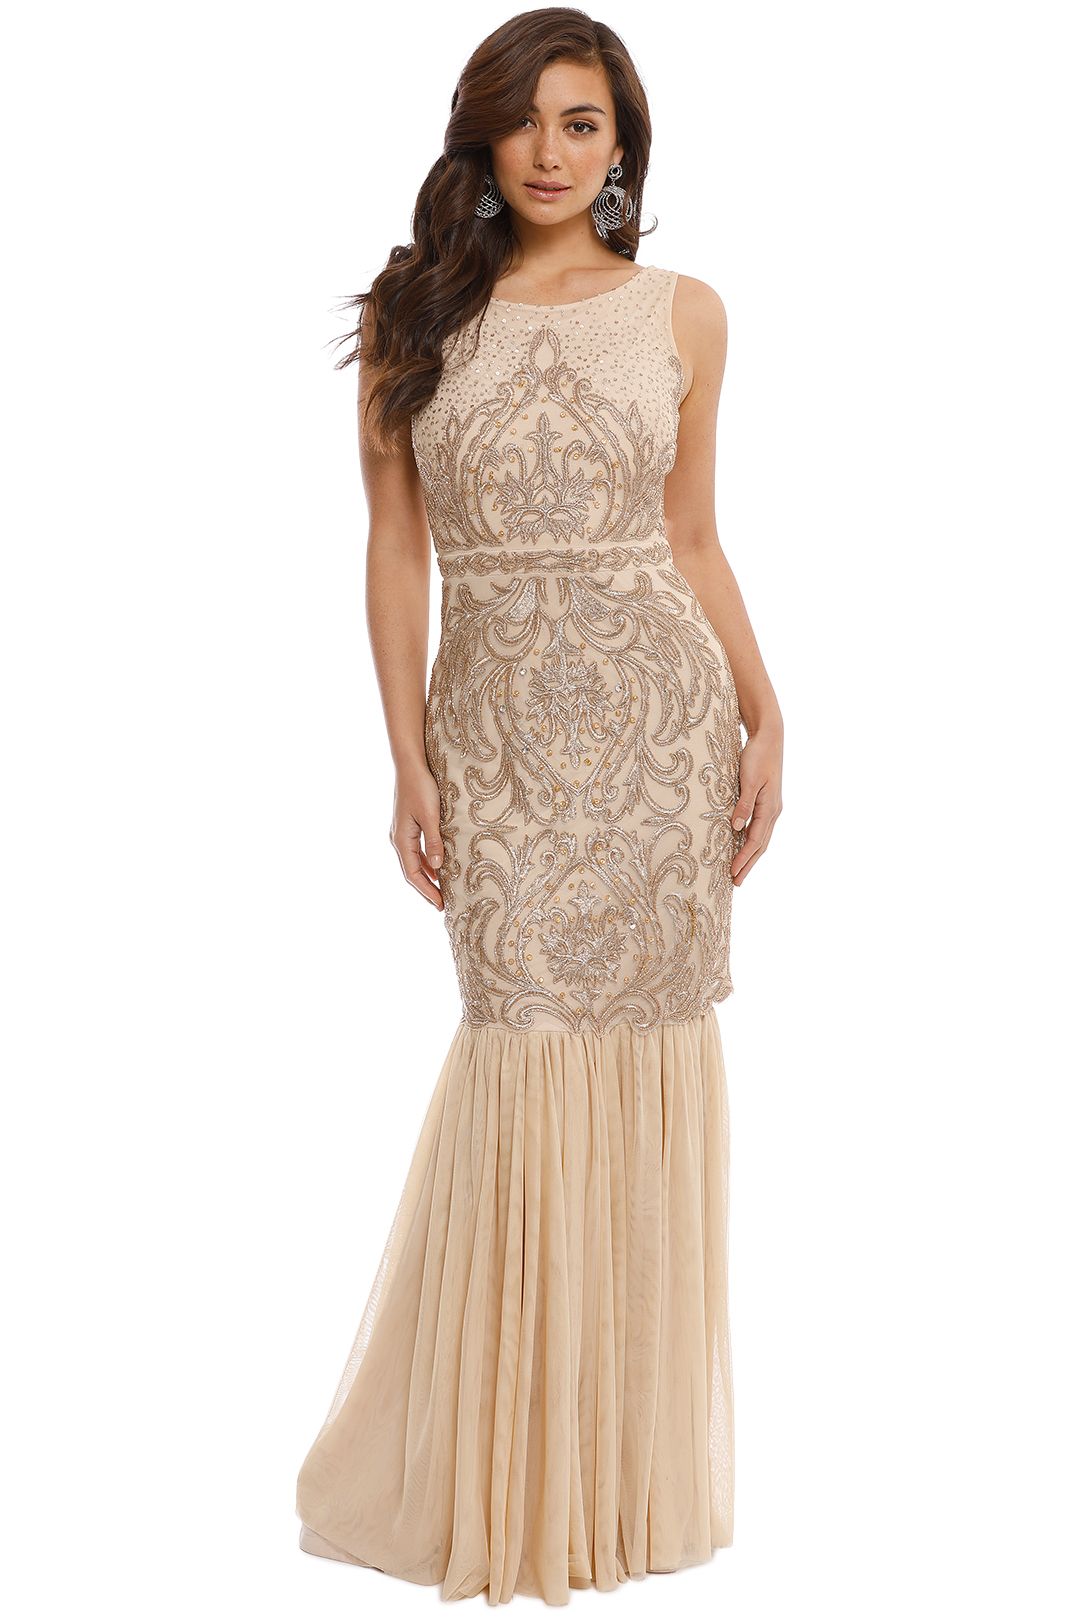 Badgley Mischka - Champagne Beaded Gown - Front